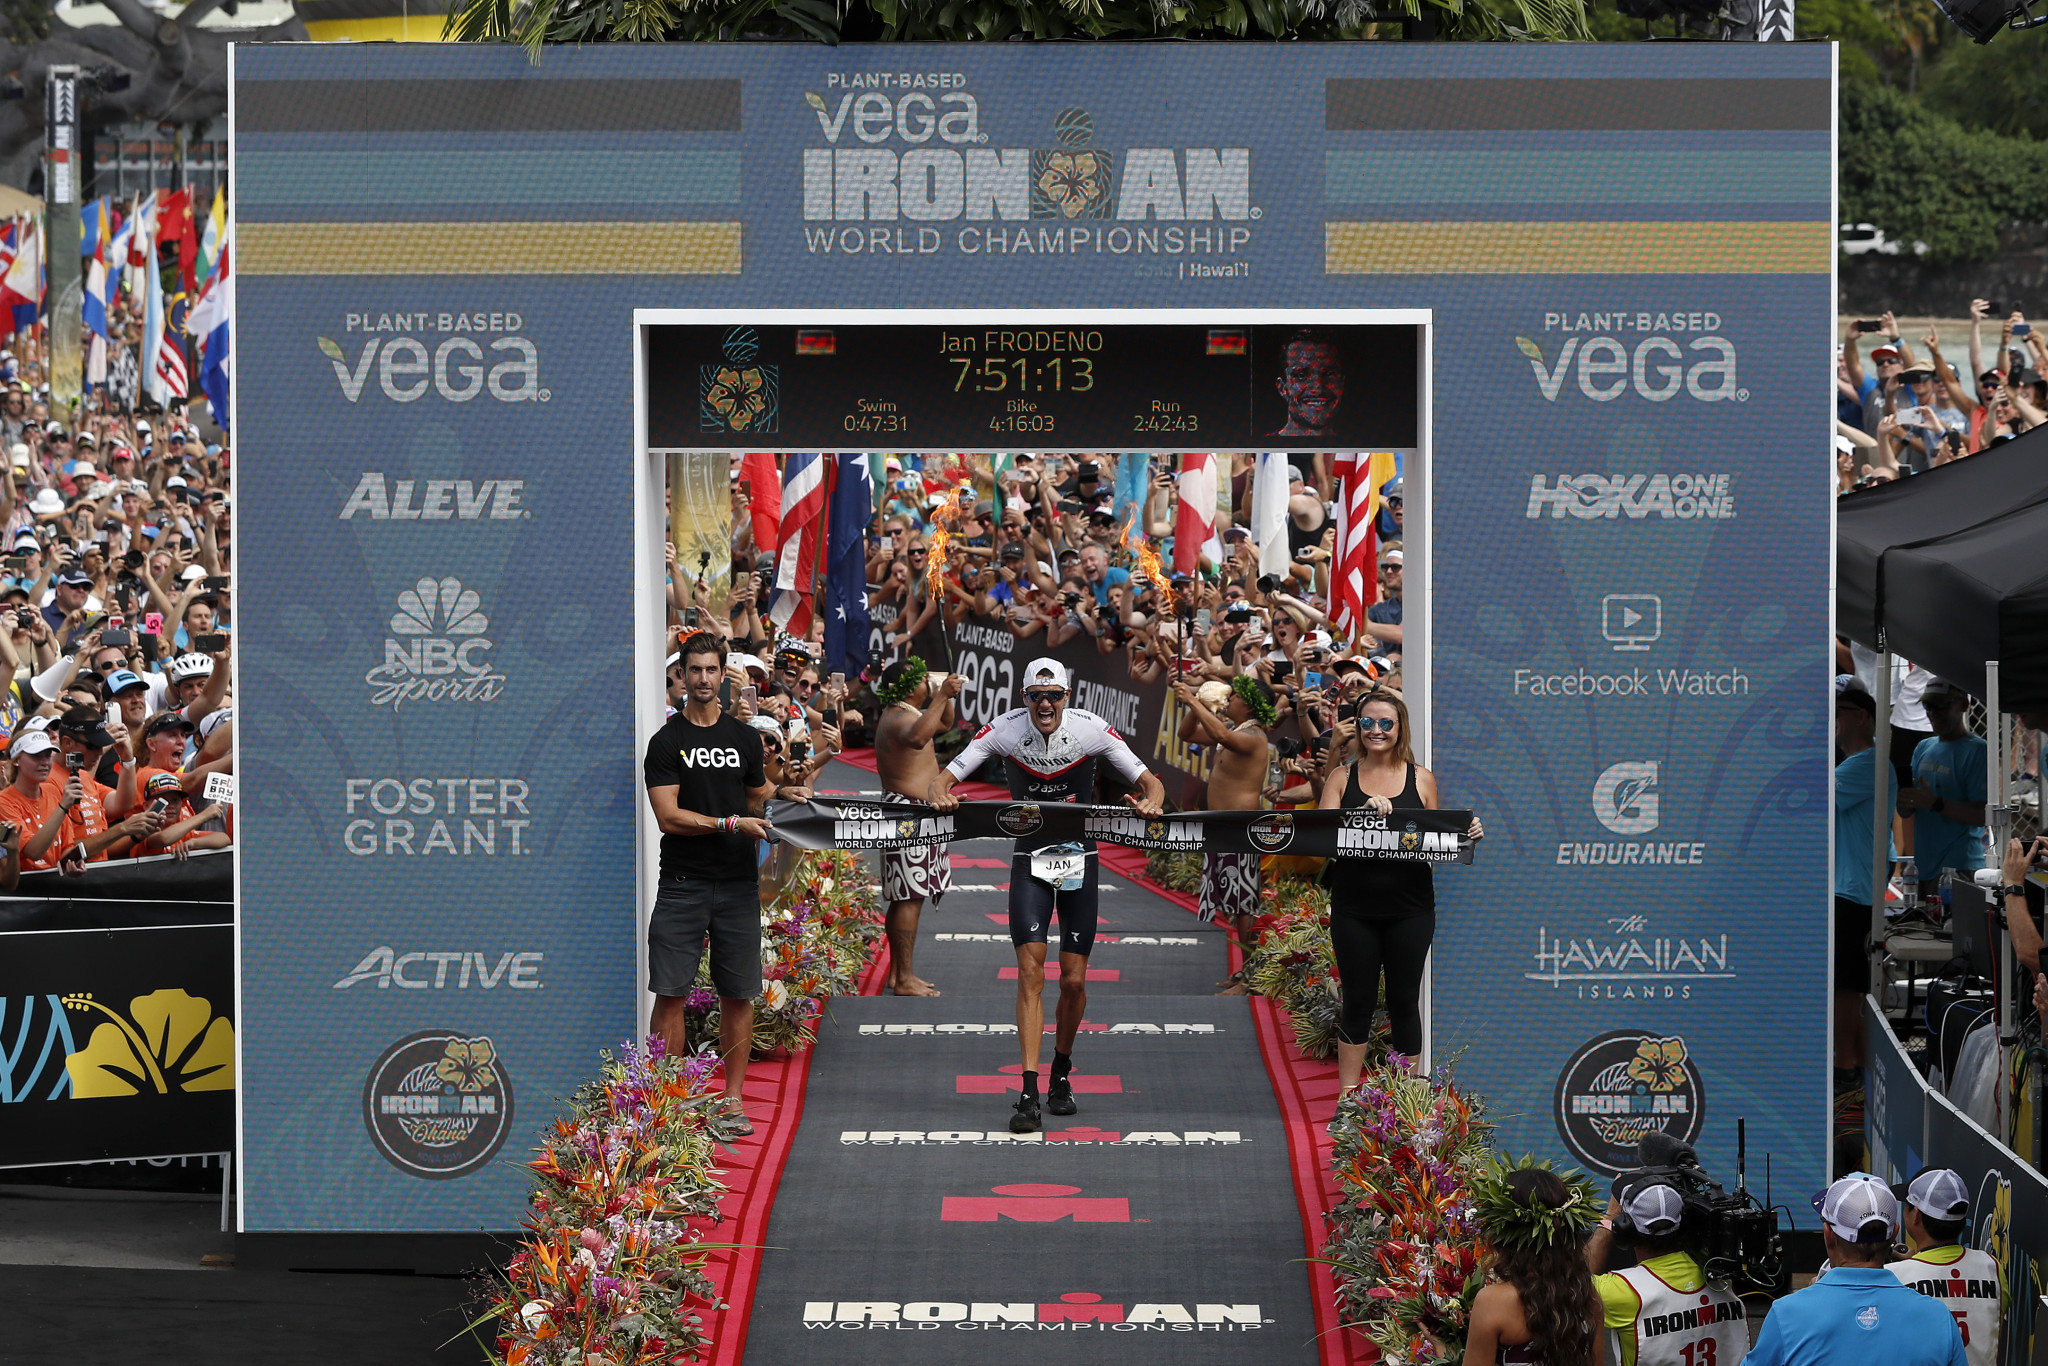 Advance reach agreement to acquire Ironman Group from Wanda Sports